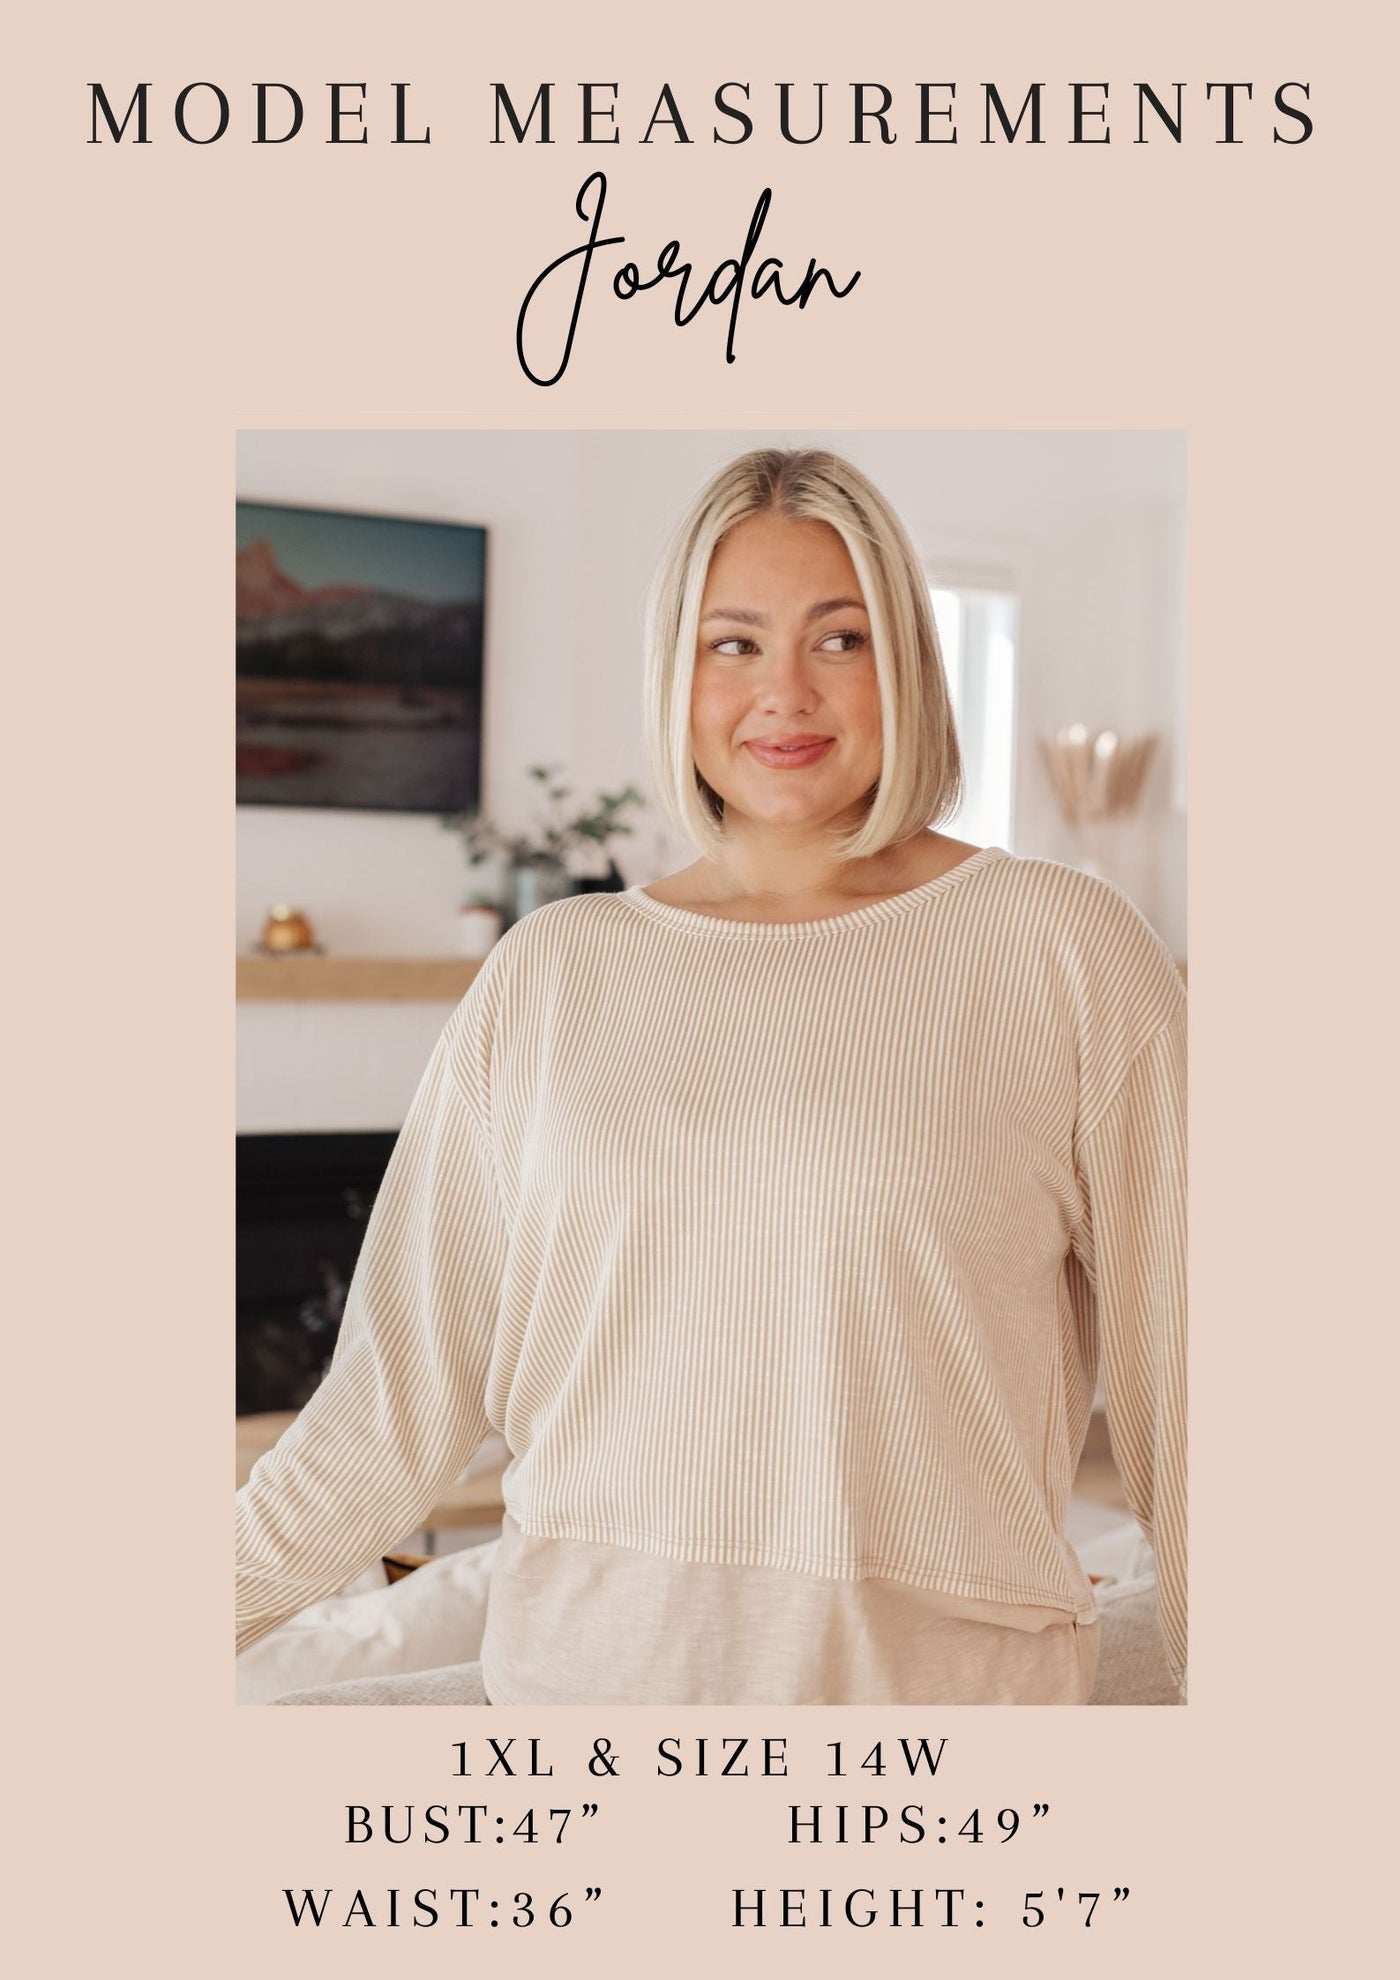 Meet the Dazzlingly Draped V-Neck Blouse! This elevated peplum style is constructed from a gorgeous shimmering bronze fabrication, a surplice front forms the flattering V-neckline.